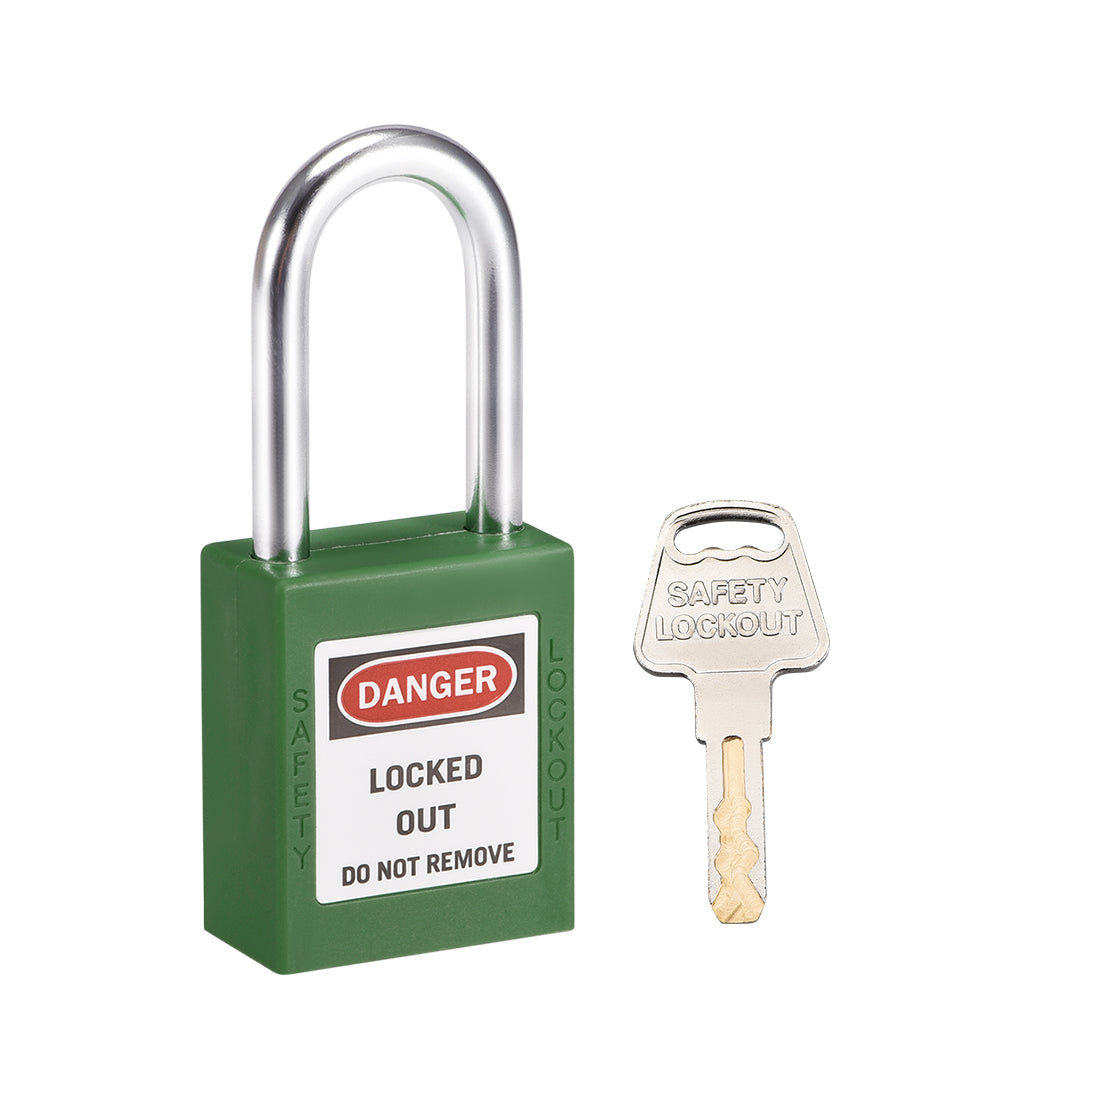 uxcell Uxcell Lockout Tagout Safety Padlock 38mm Steel Shackle Keyed Alike Green